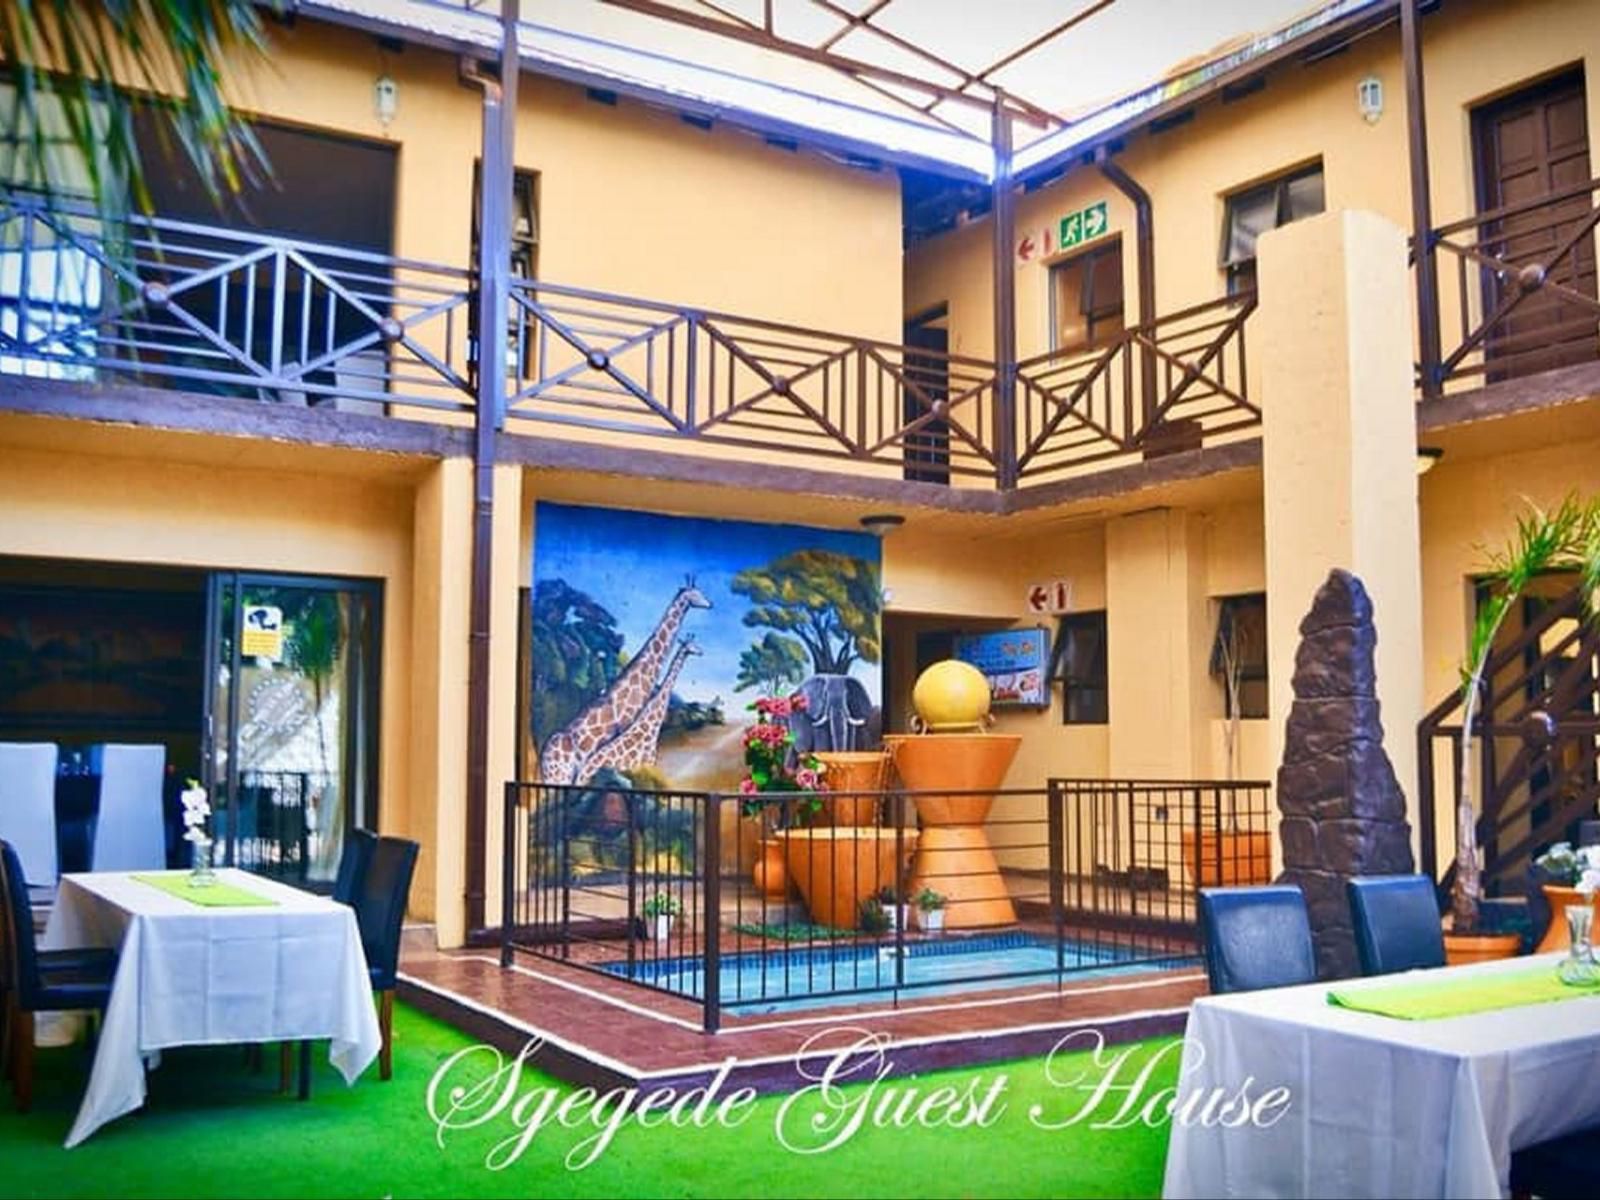 Sgegede Guest House Mountain View Pretoria Pretoria Tshwane Gauteng South Africa Complementary Colors, House, Building, Architecture, Palm Tree, Plant, Nature, Wood, Swimming Pool